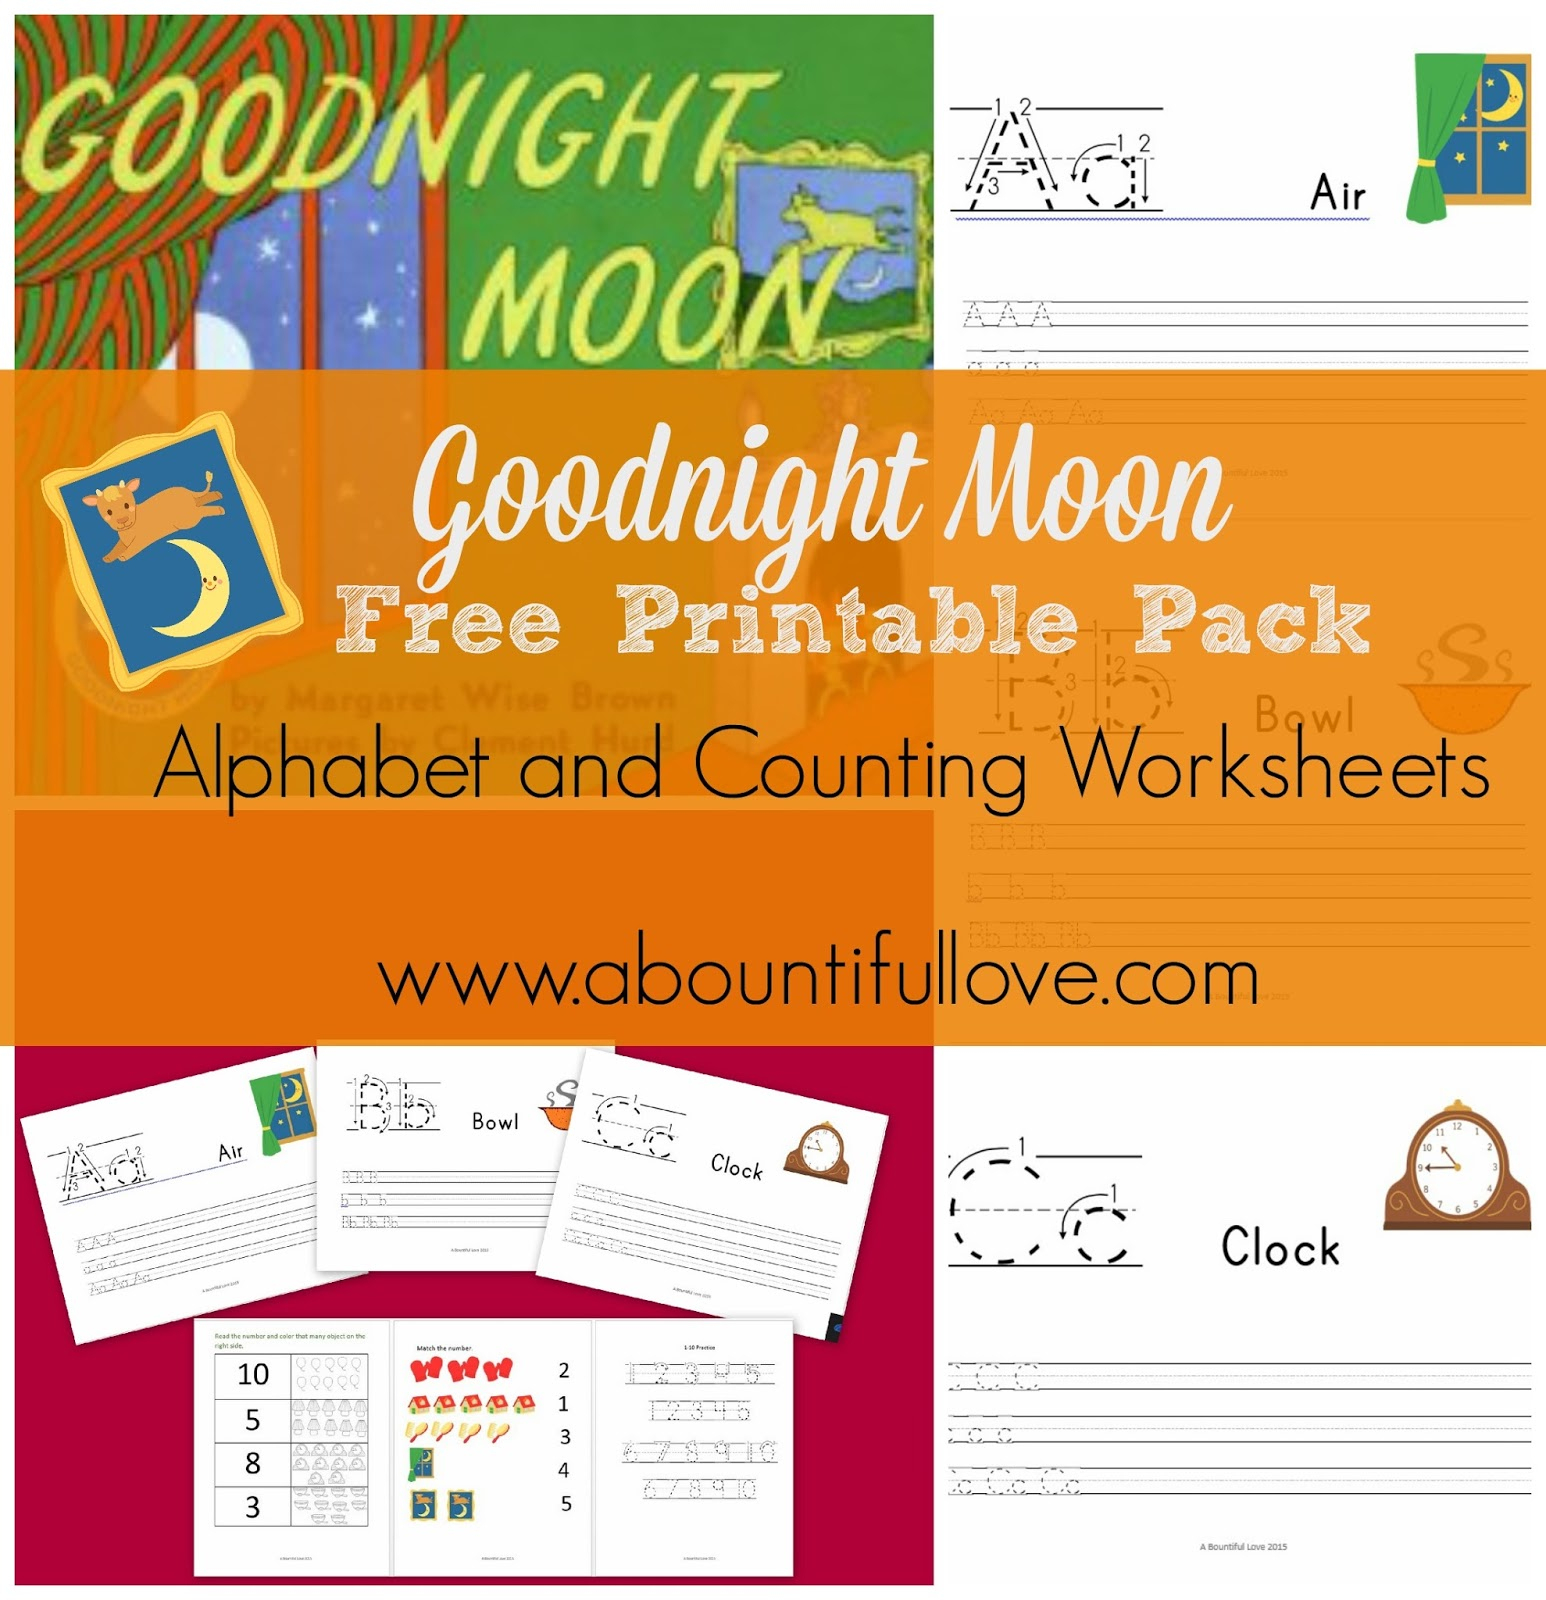 Goodnight Moon Free Printable Pack - A Bountiful Love | Goodnight Moon Printable Worksheets